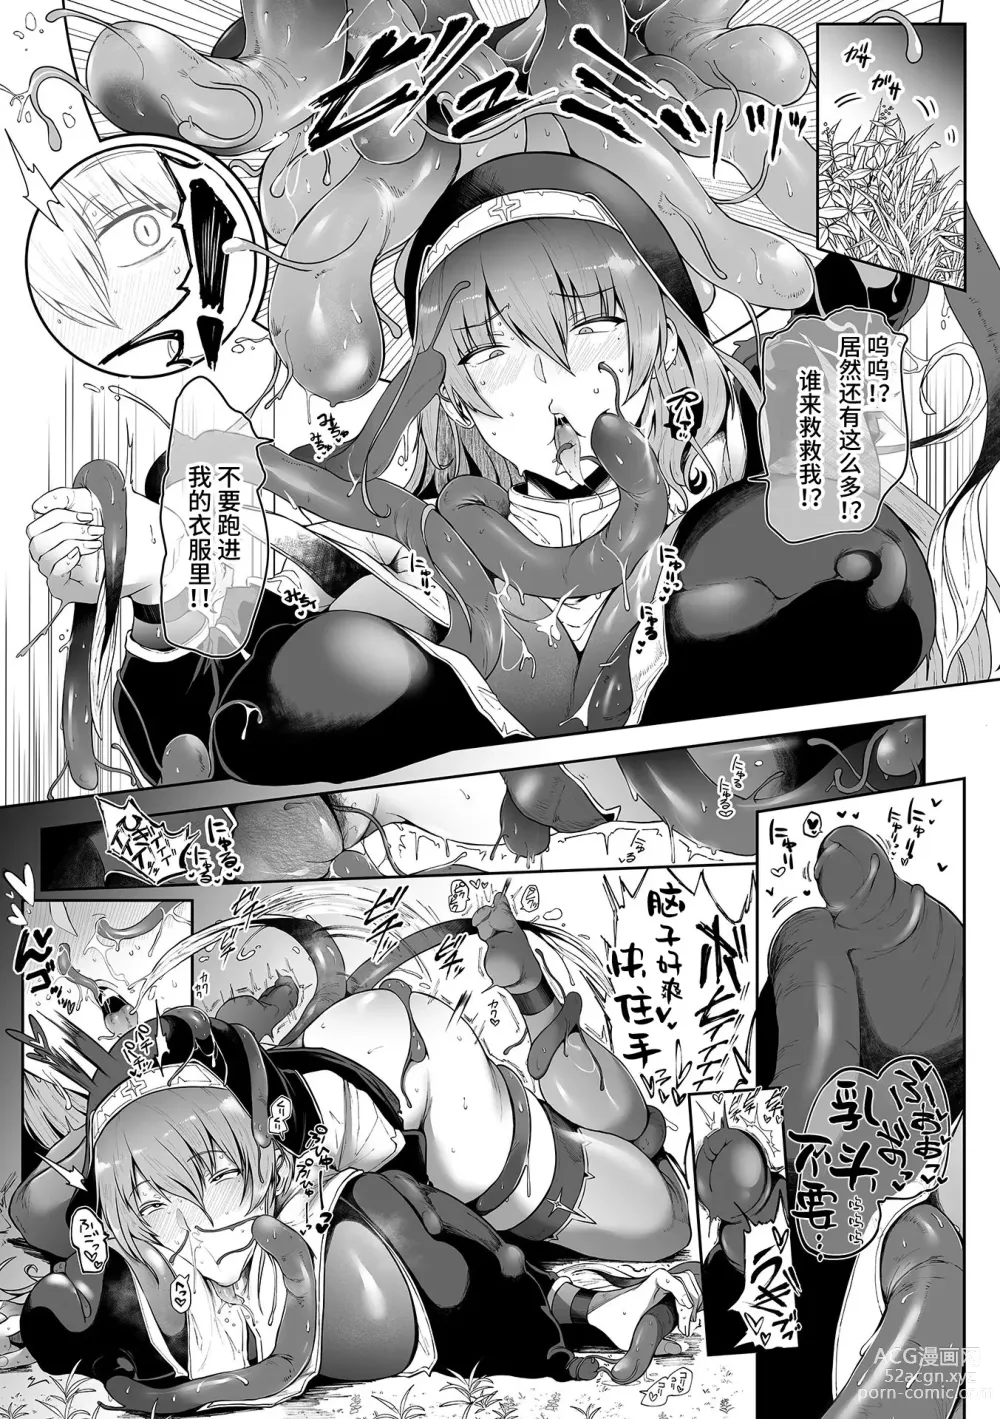 Page 4 of manga 淫蟲の聖女